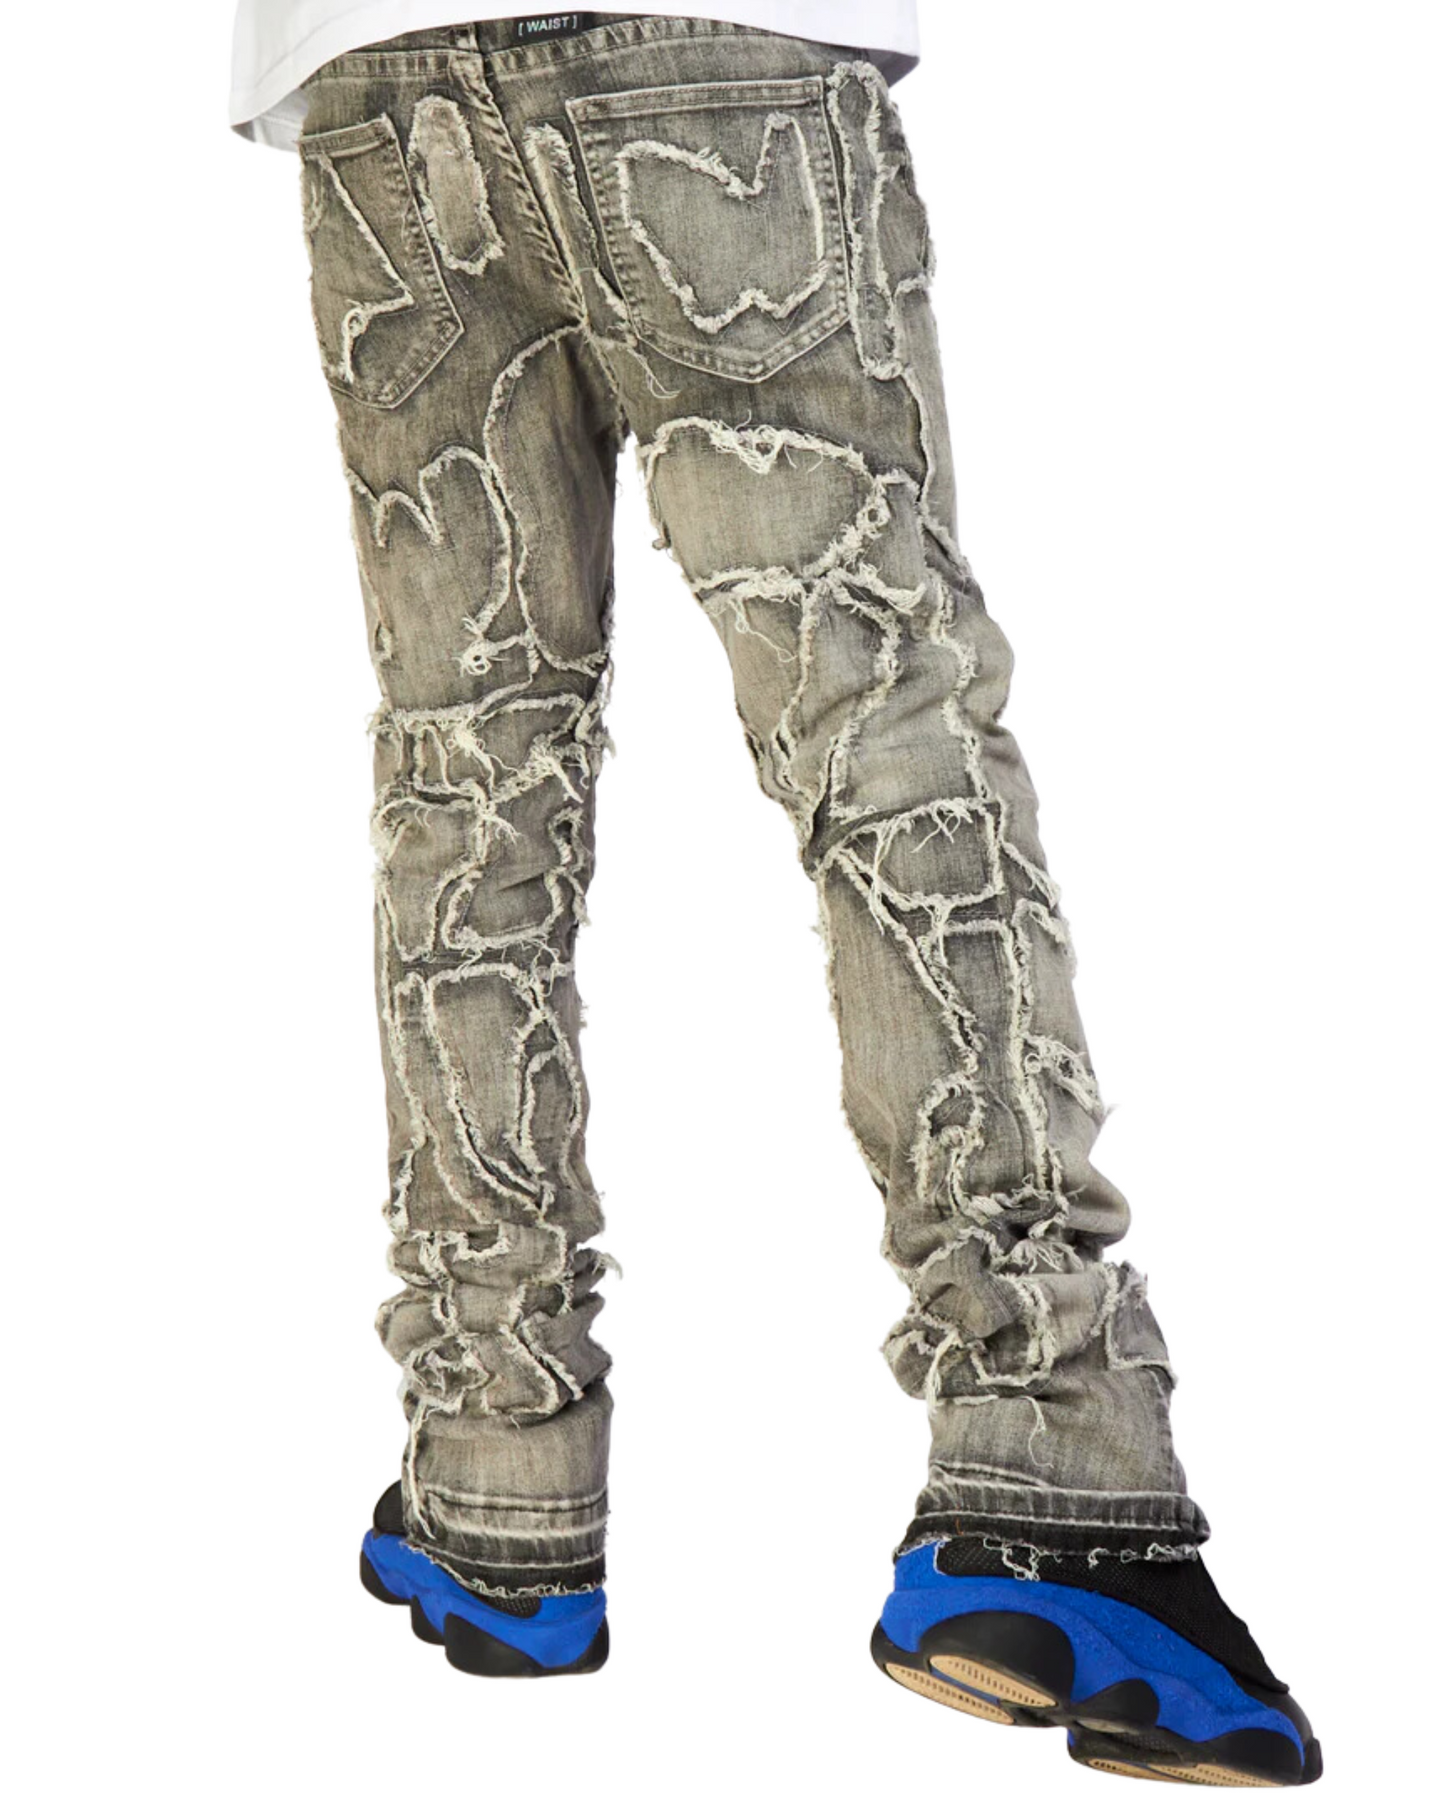 Frayed Abstract Shapes Stacked Jeans 5811